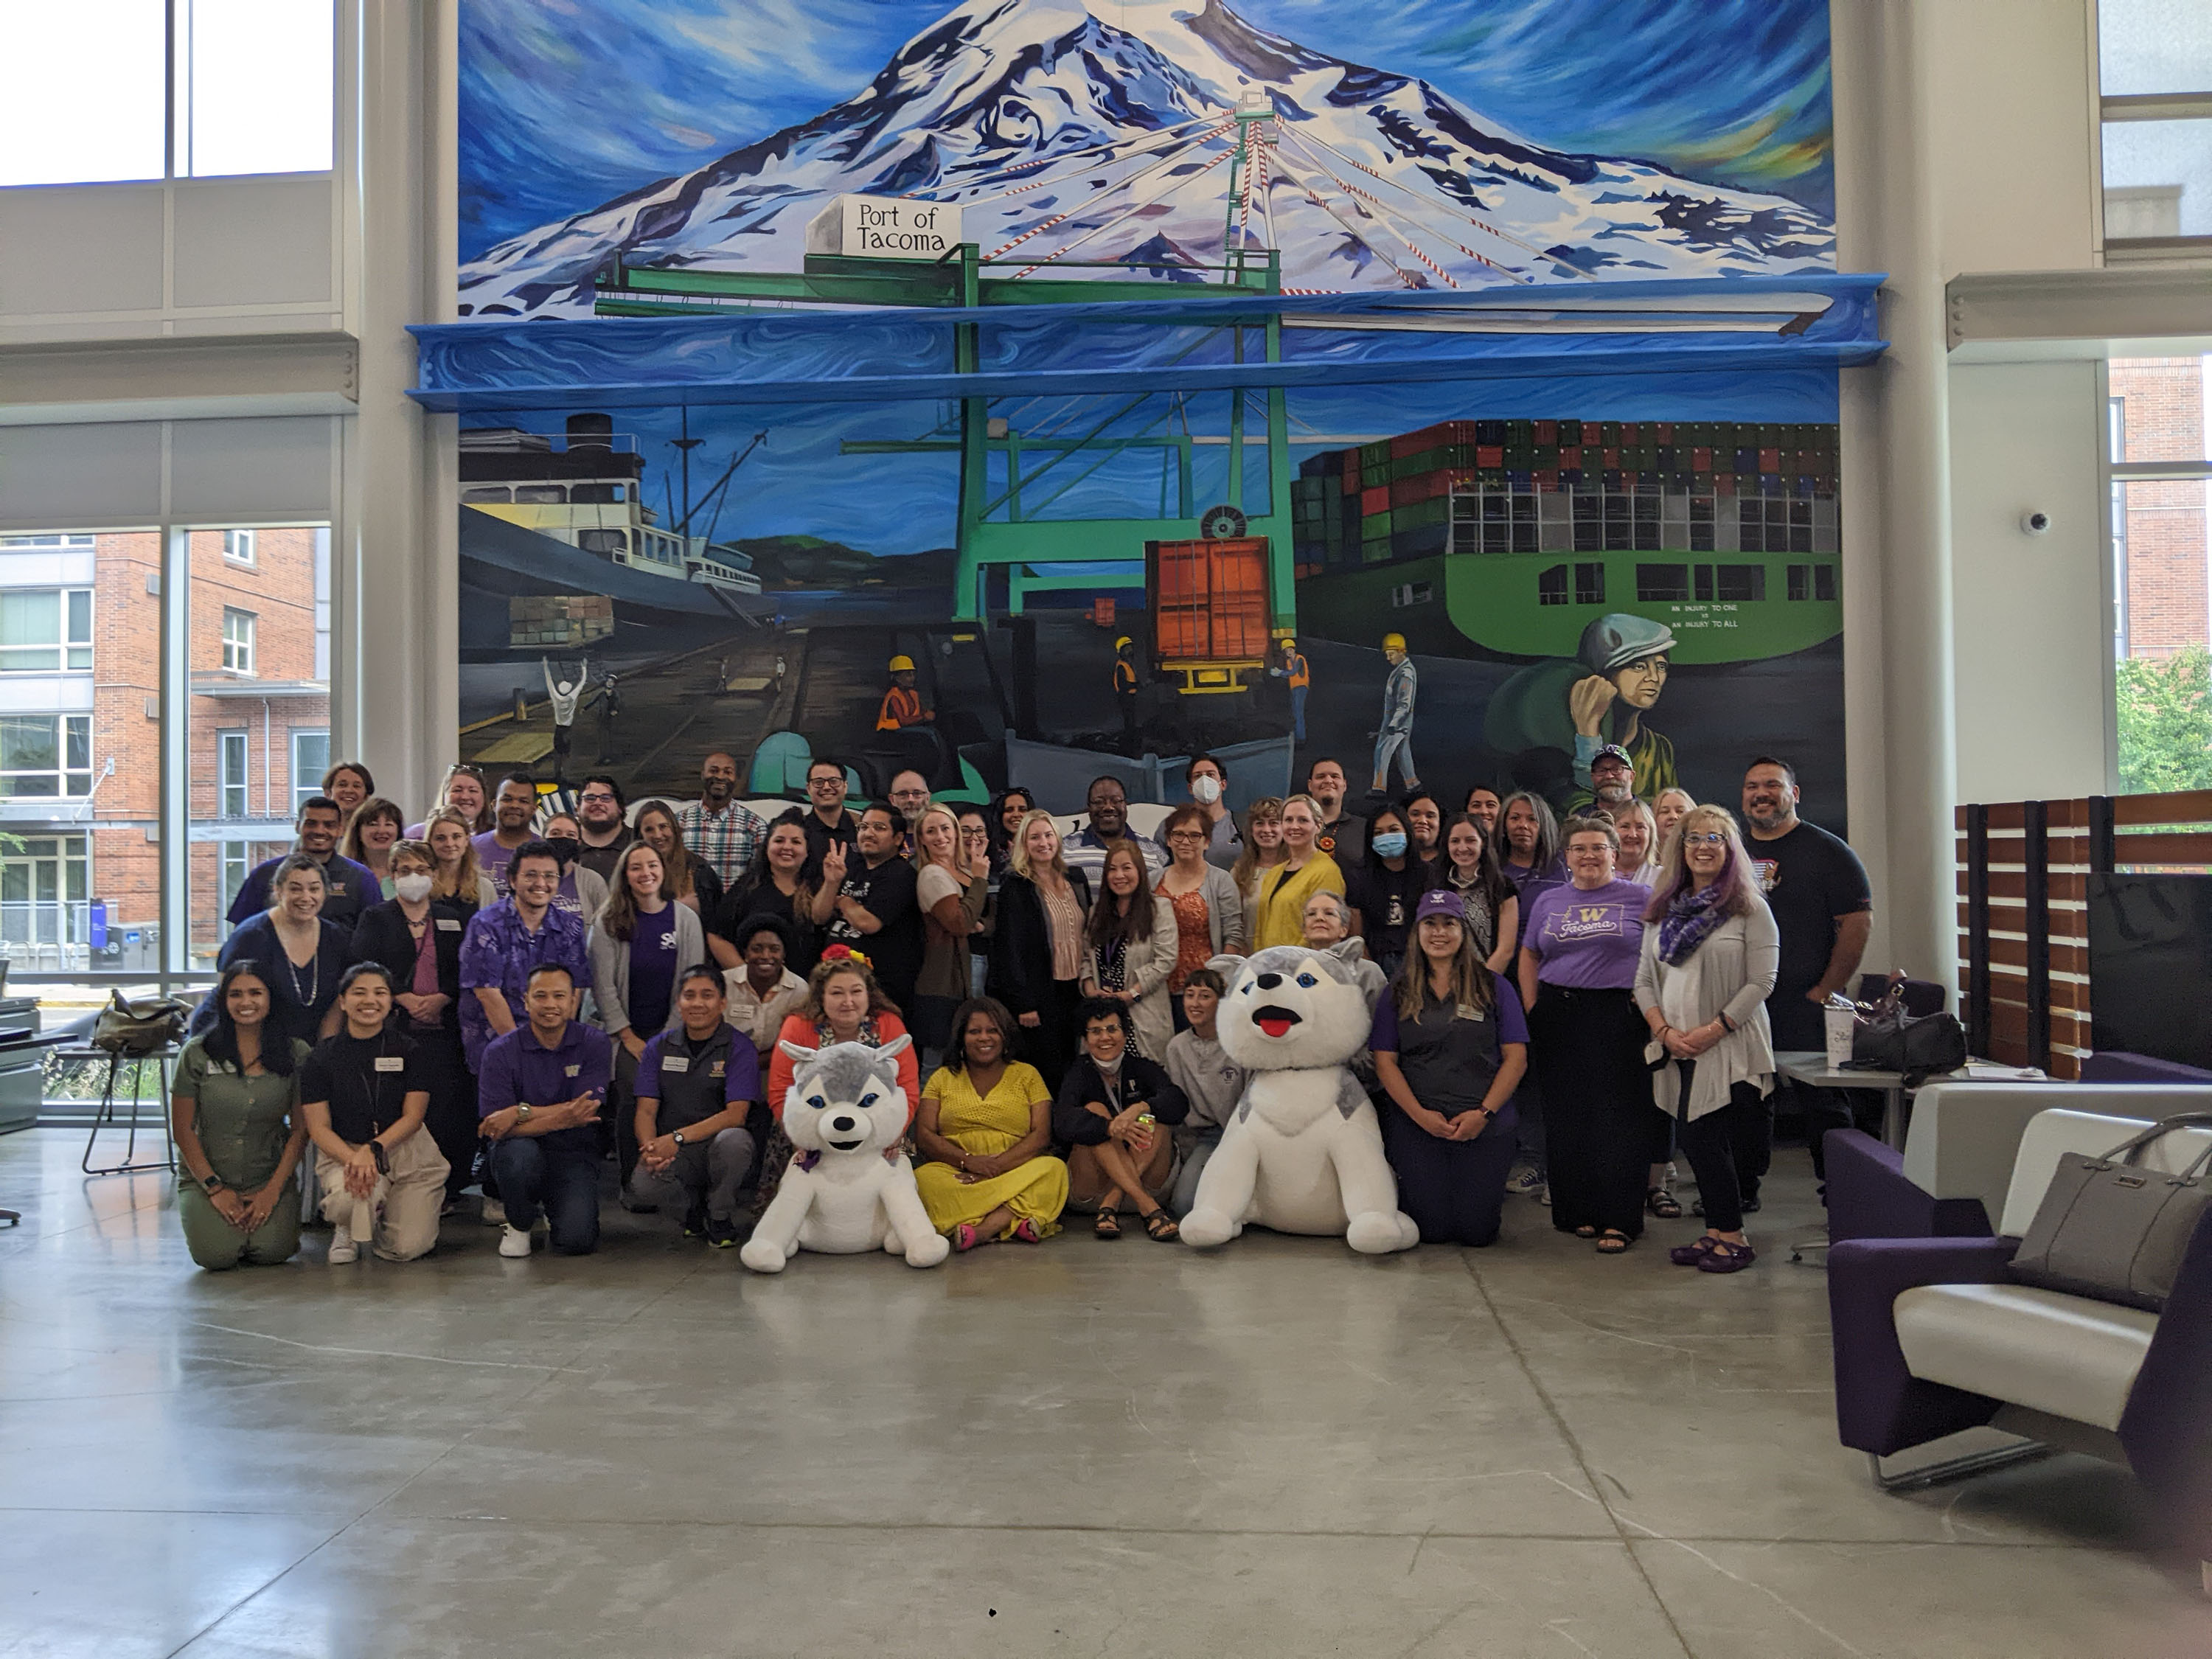 Photo of Student Affairs staff in front of Mt Rainier mural in University Y Student center